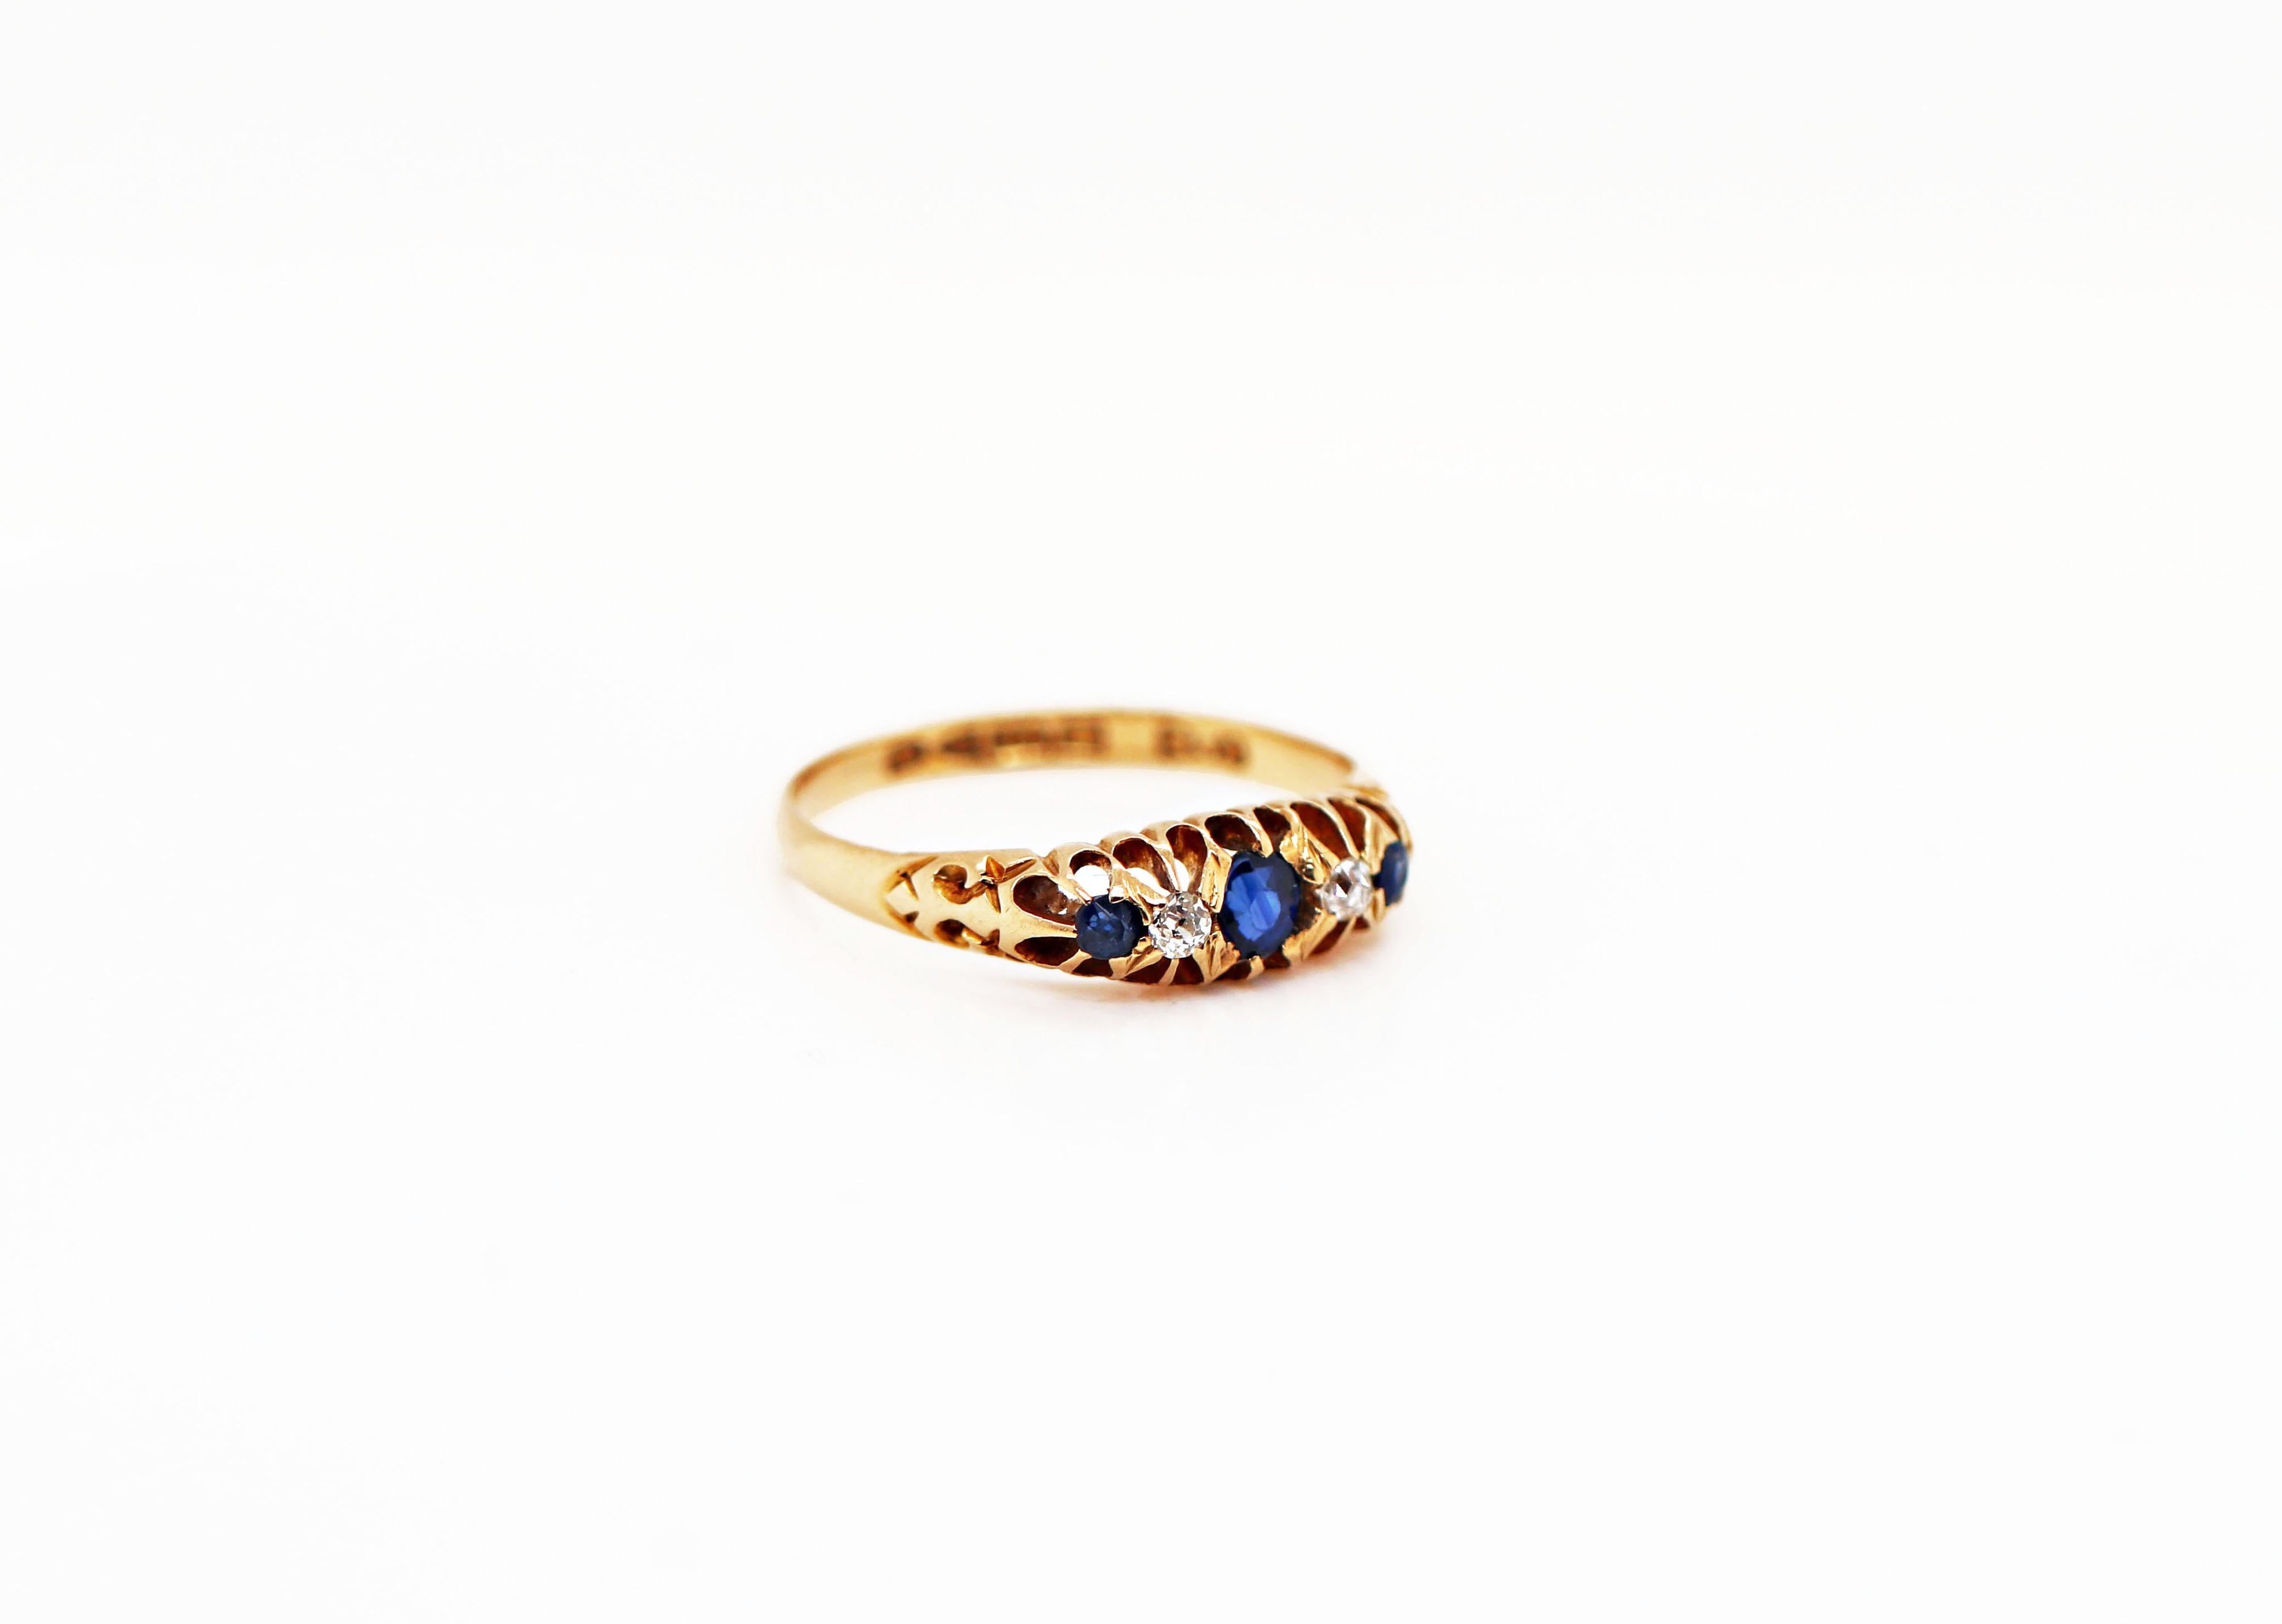 Edwardian Antique Five-Stone Sapphire and Old Cut Diamond Yellow Gold Ring, 1906